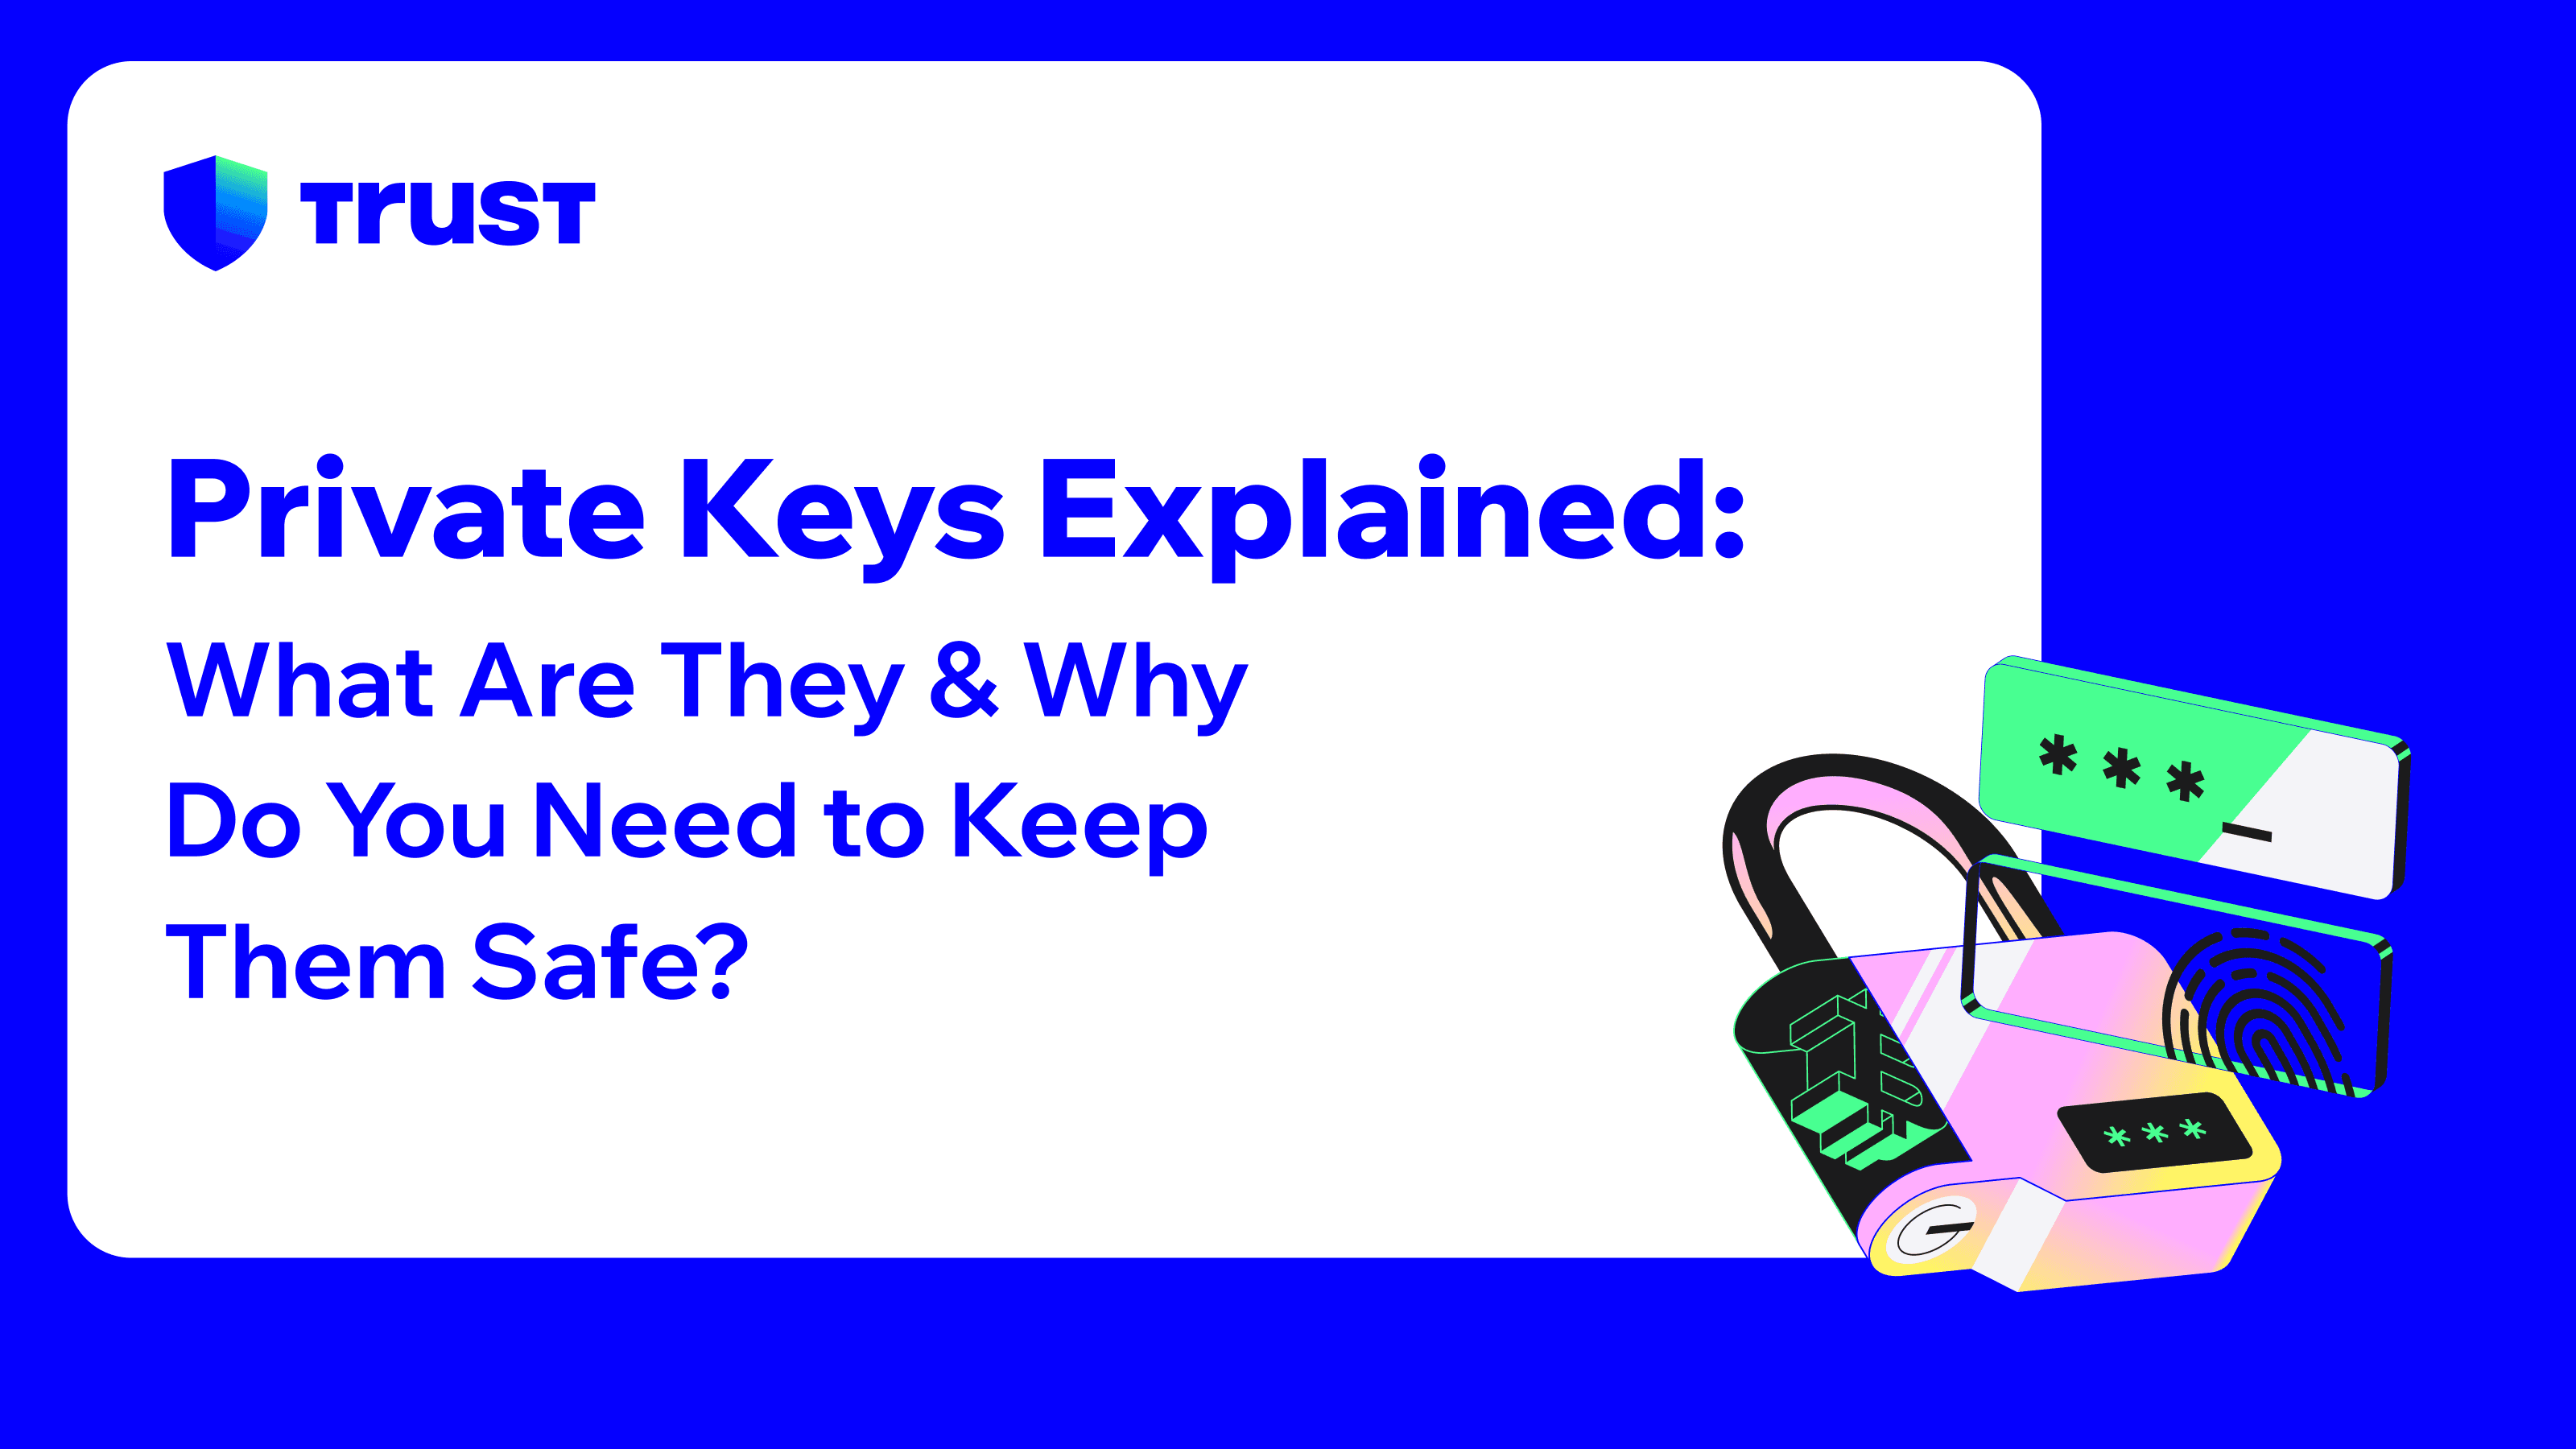 Private Keys Explained: What Are They & Why Do You Need to Keep Them Safe?